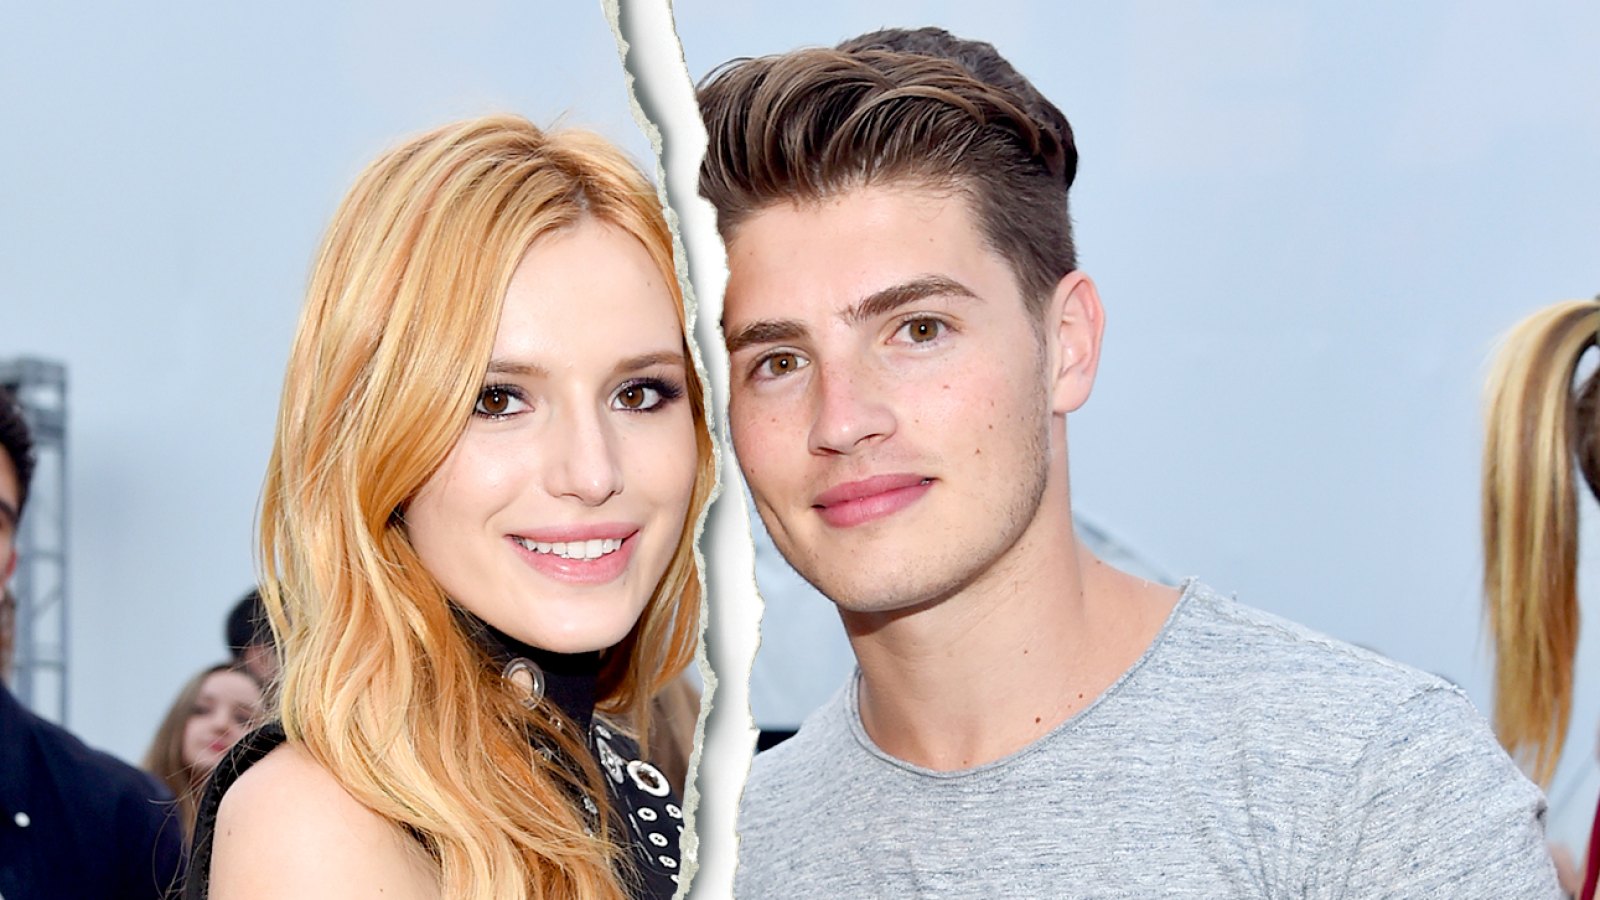 Bella Thorne and Greg Sulkin attend the MTV and Dimension TV premiere of "Scream" at the Los Angeles Film Festival on June 14, 2015 in Los Angeles, California.